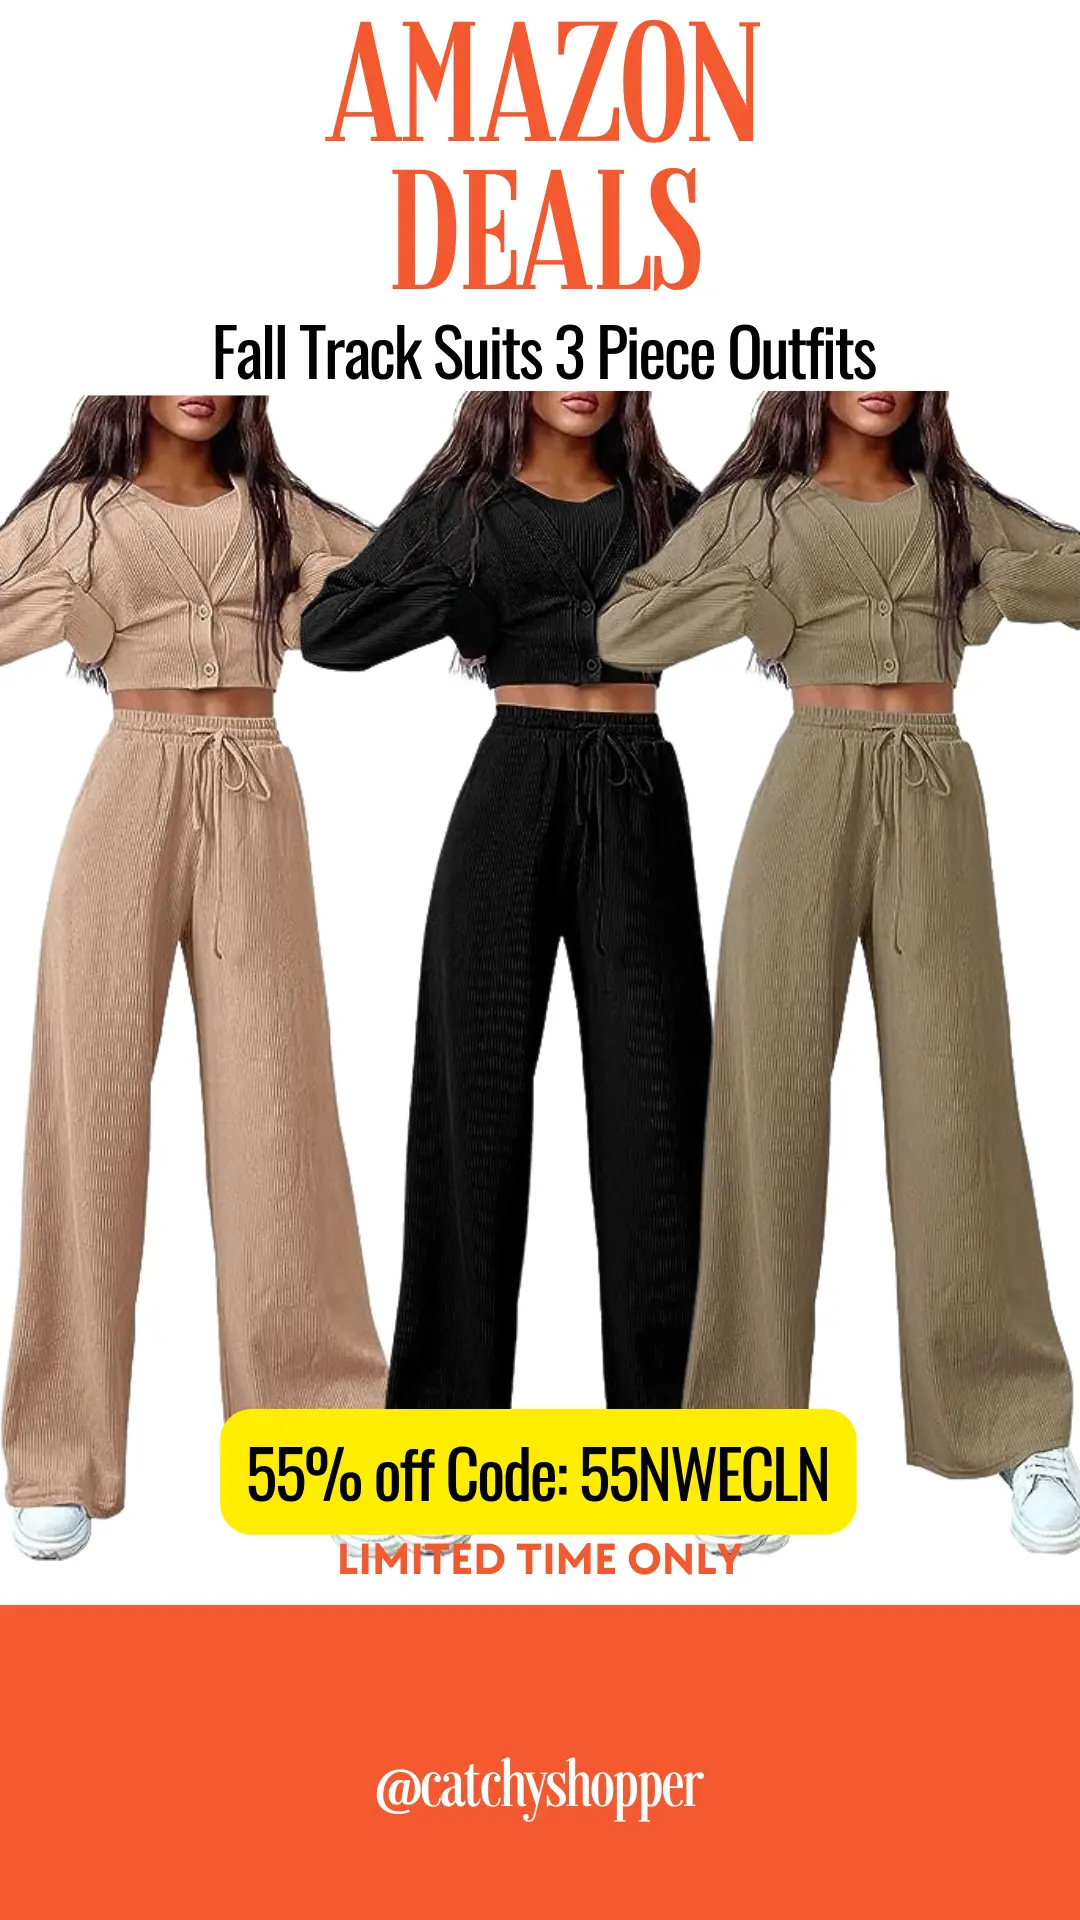 Fall Track Suits 3 Piece Outfits 